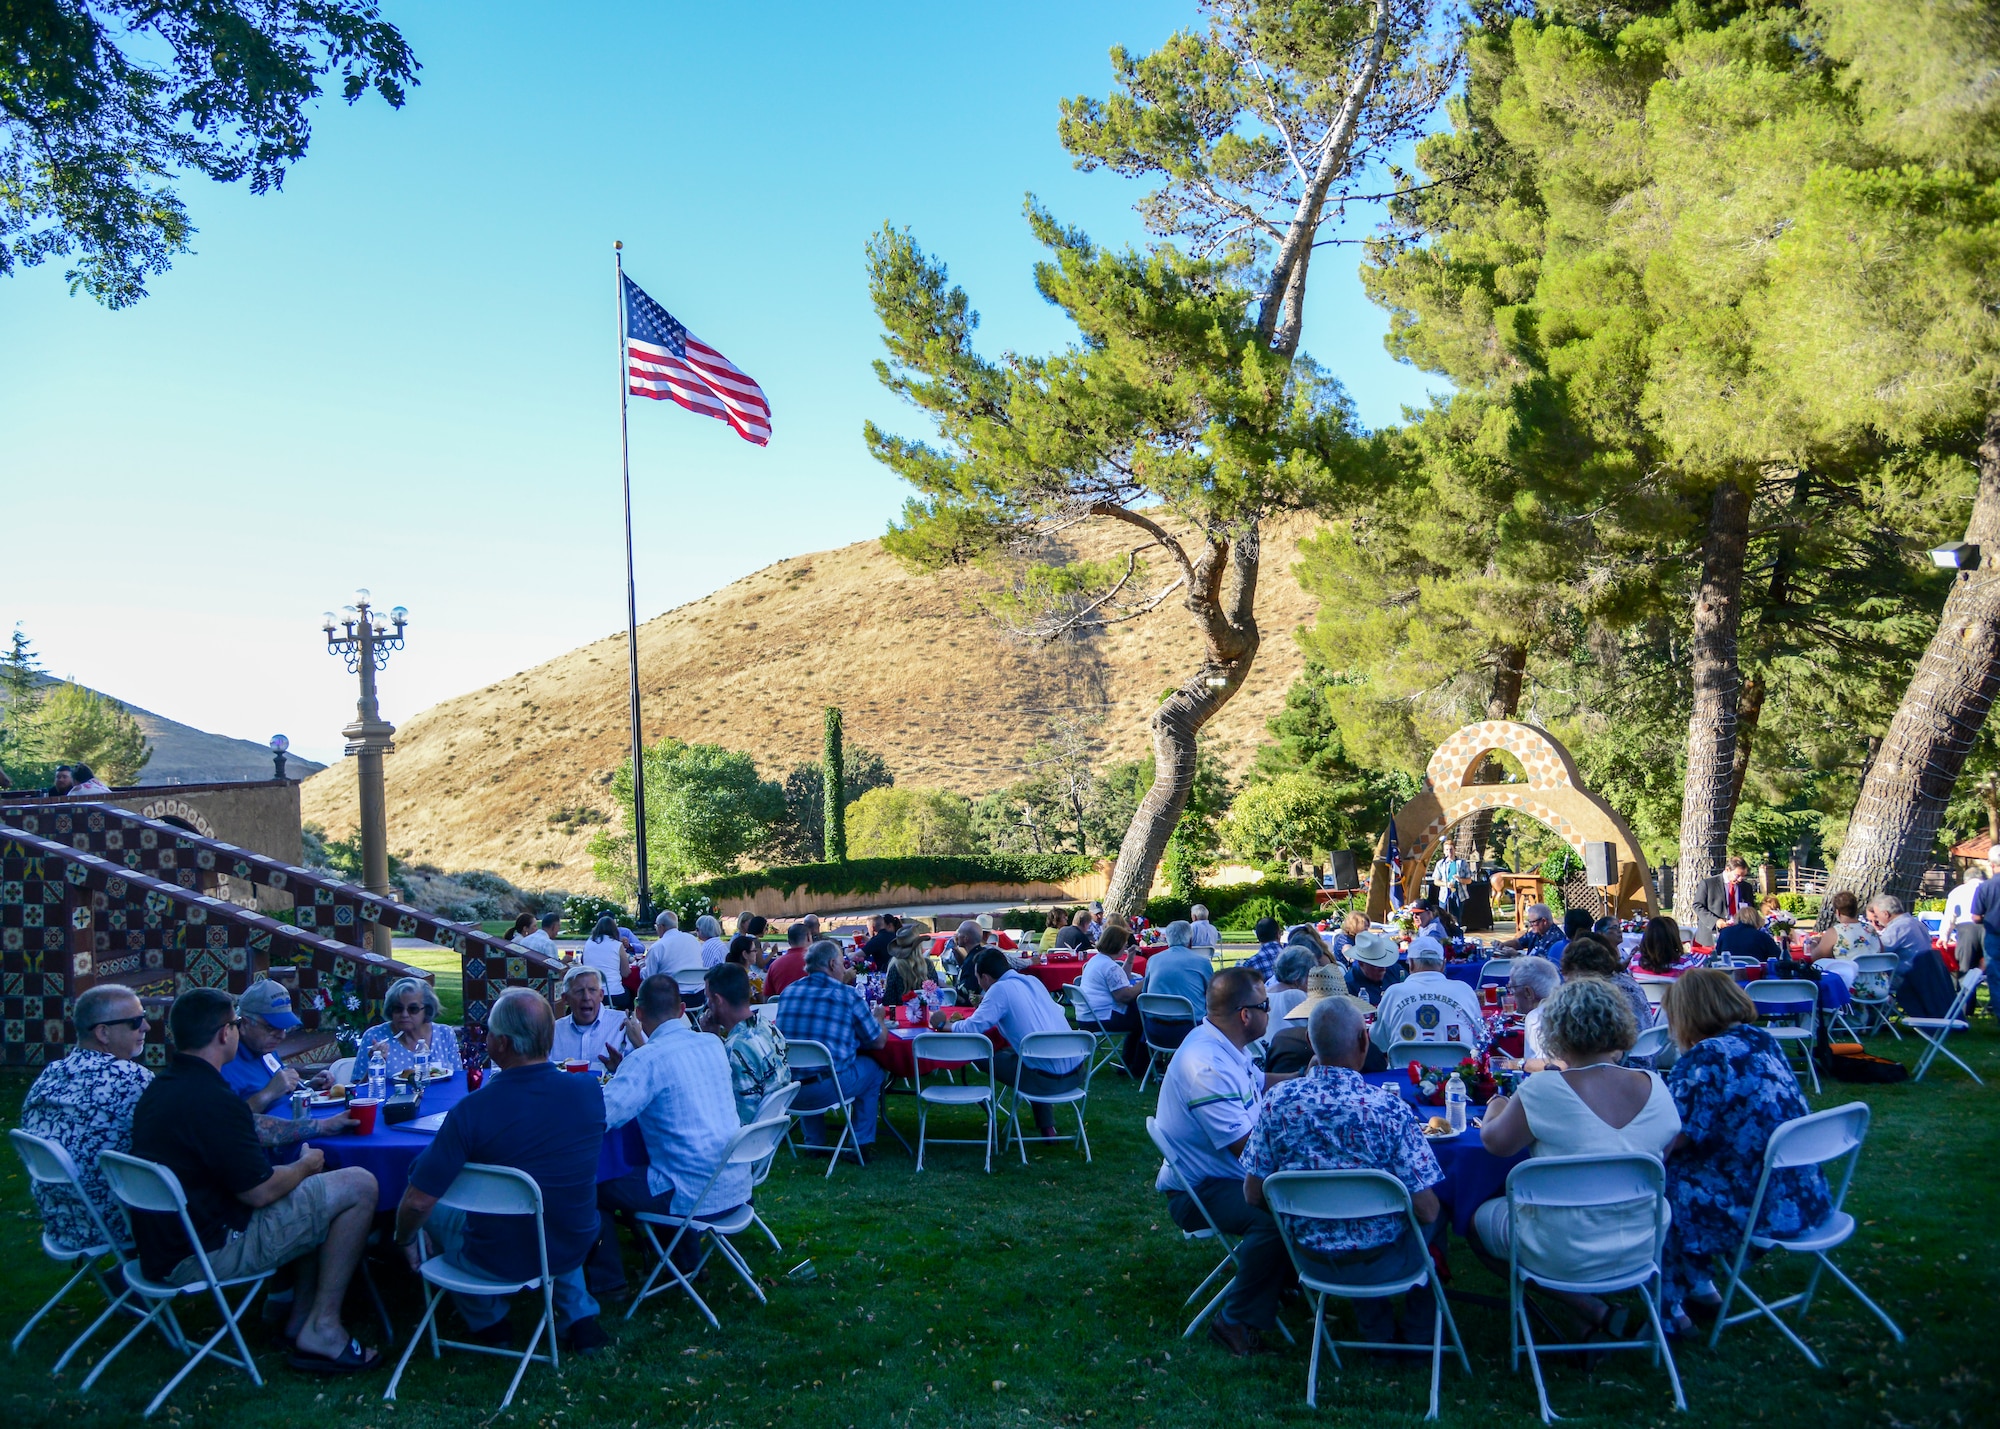 Members of the Edwards Air Force Base Civilian-Military Support Group attend their annual BBQ dinner at the Hacienda Lane Ranch in Palmdale, Calif., July 18. (U.S. Air Force photo by Giancarlo Casem)